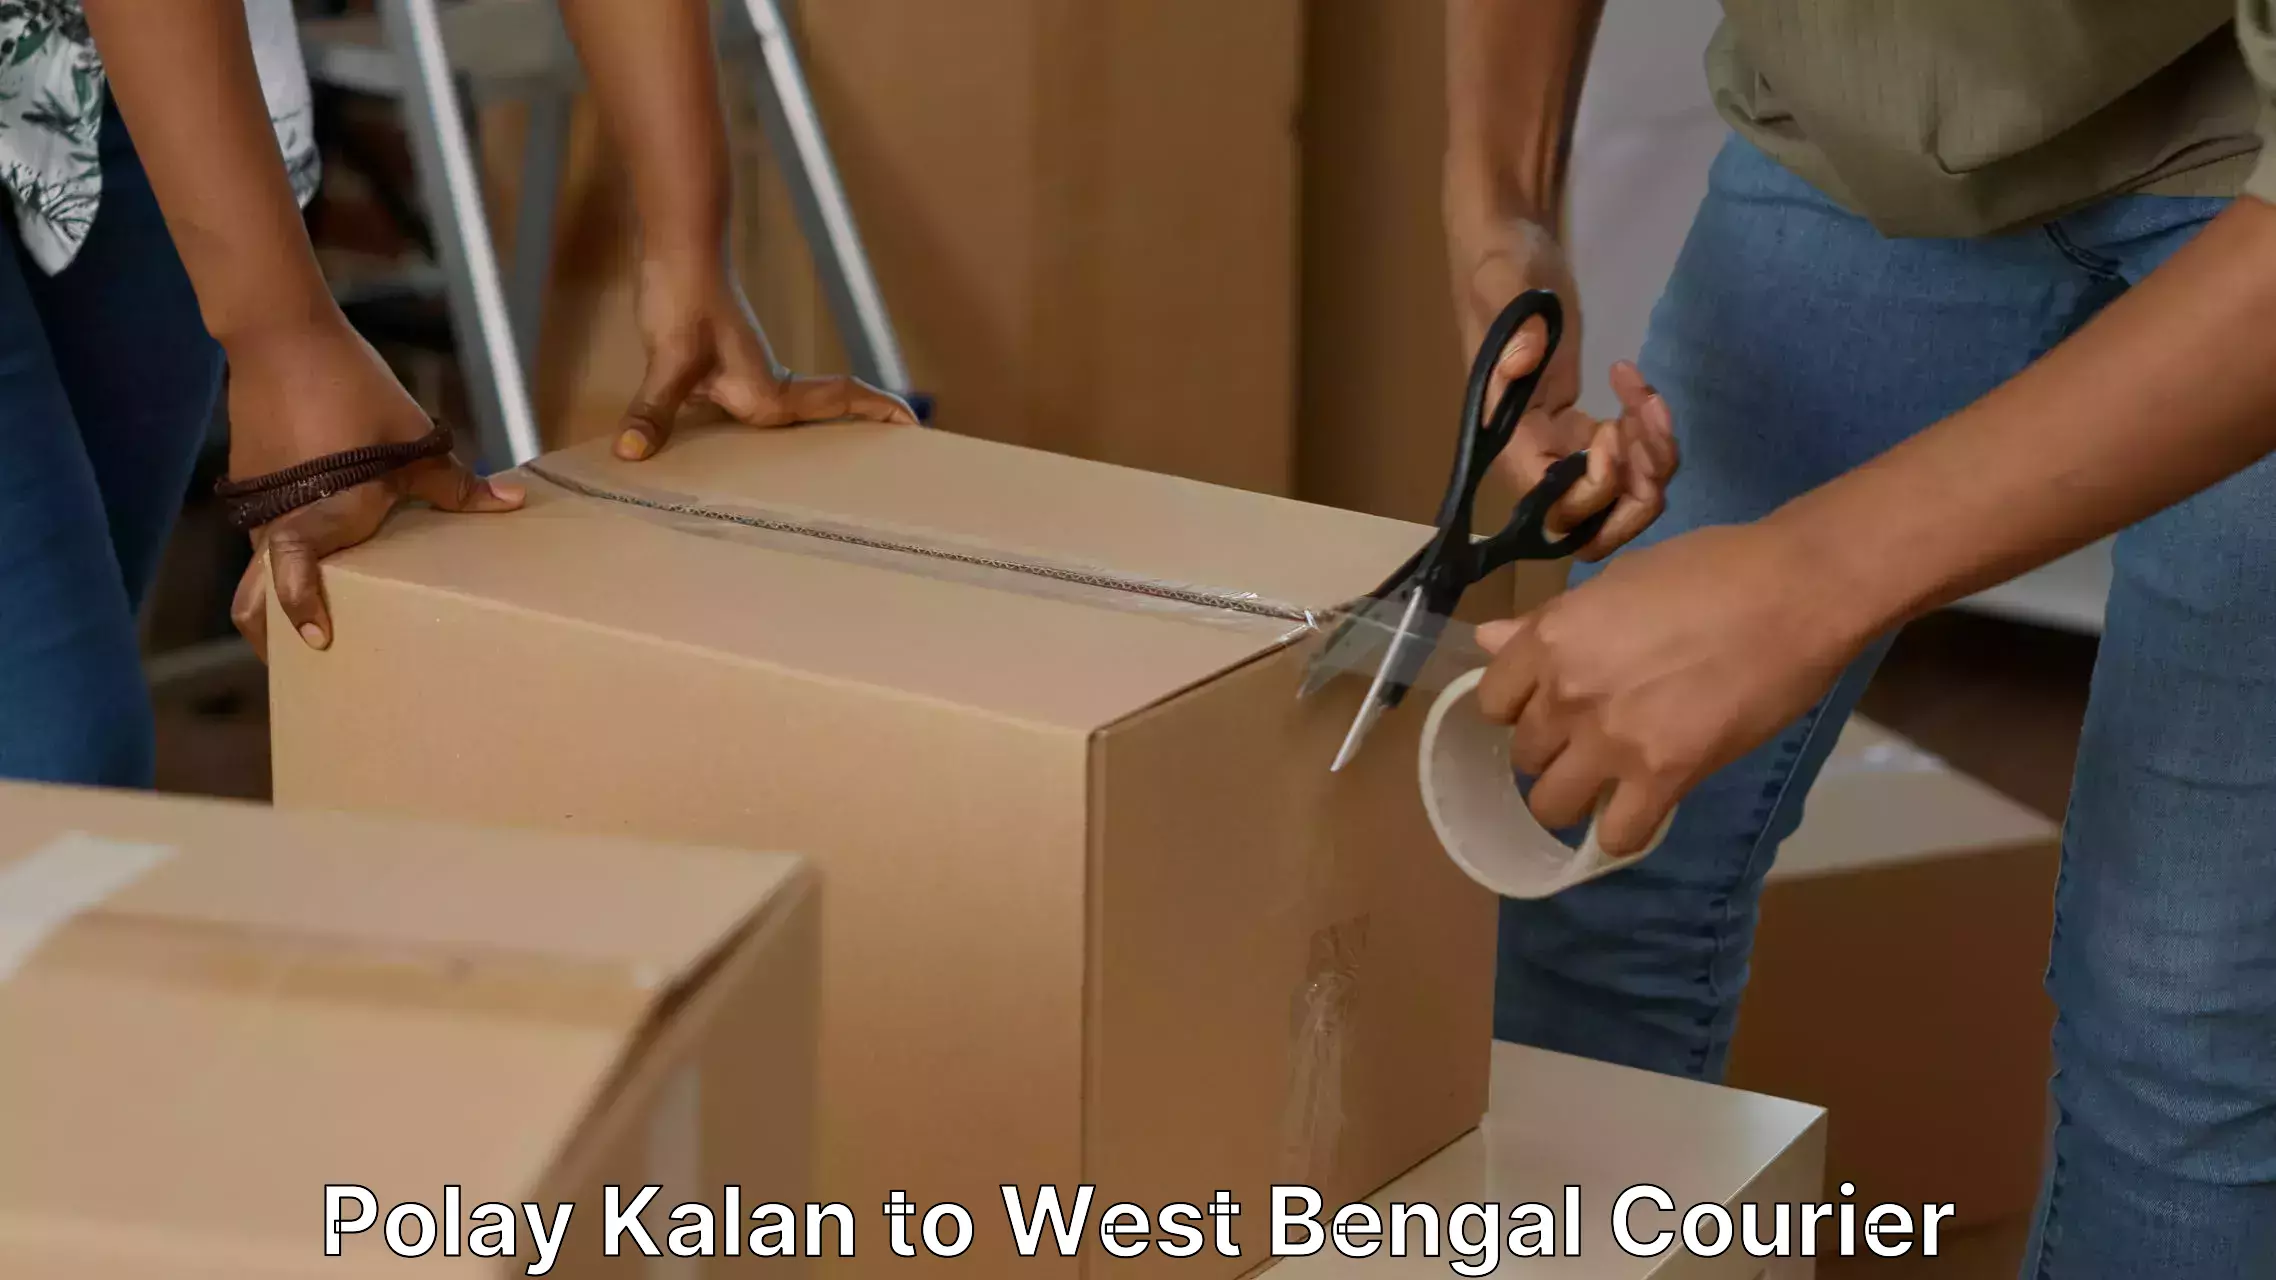 Moving and handling services Polay Kalan to West Bengal